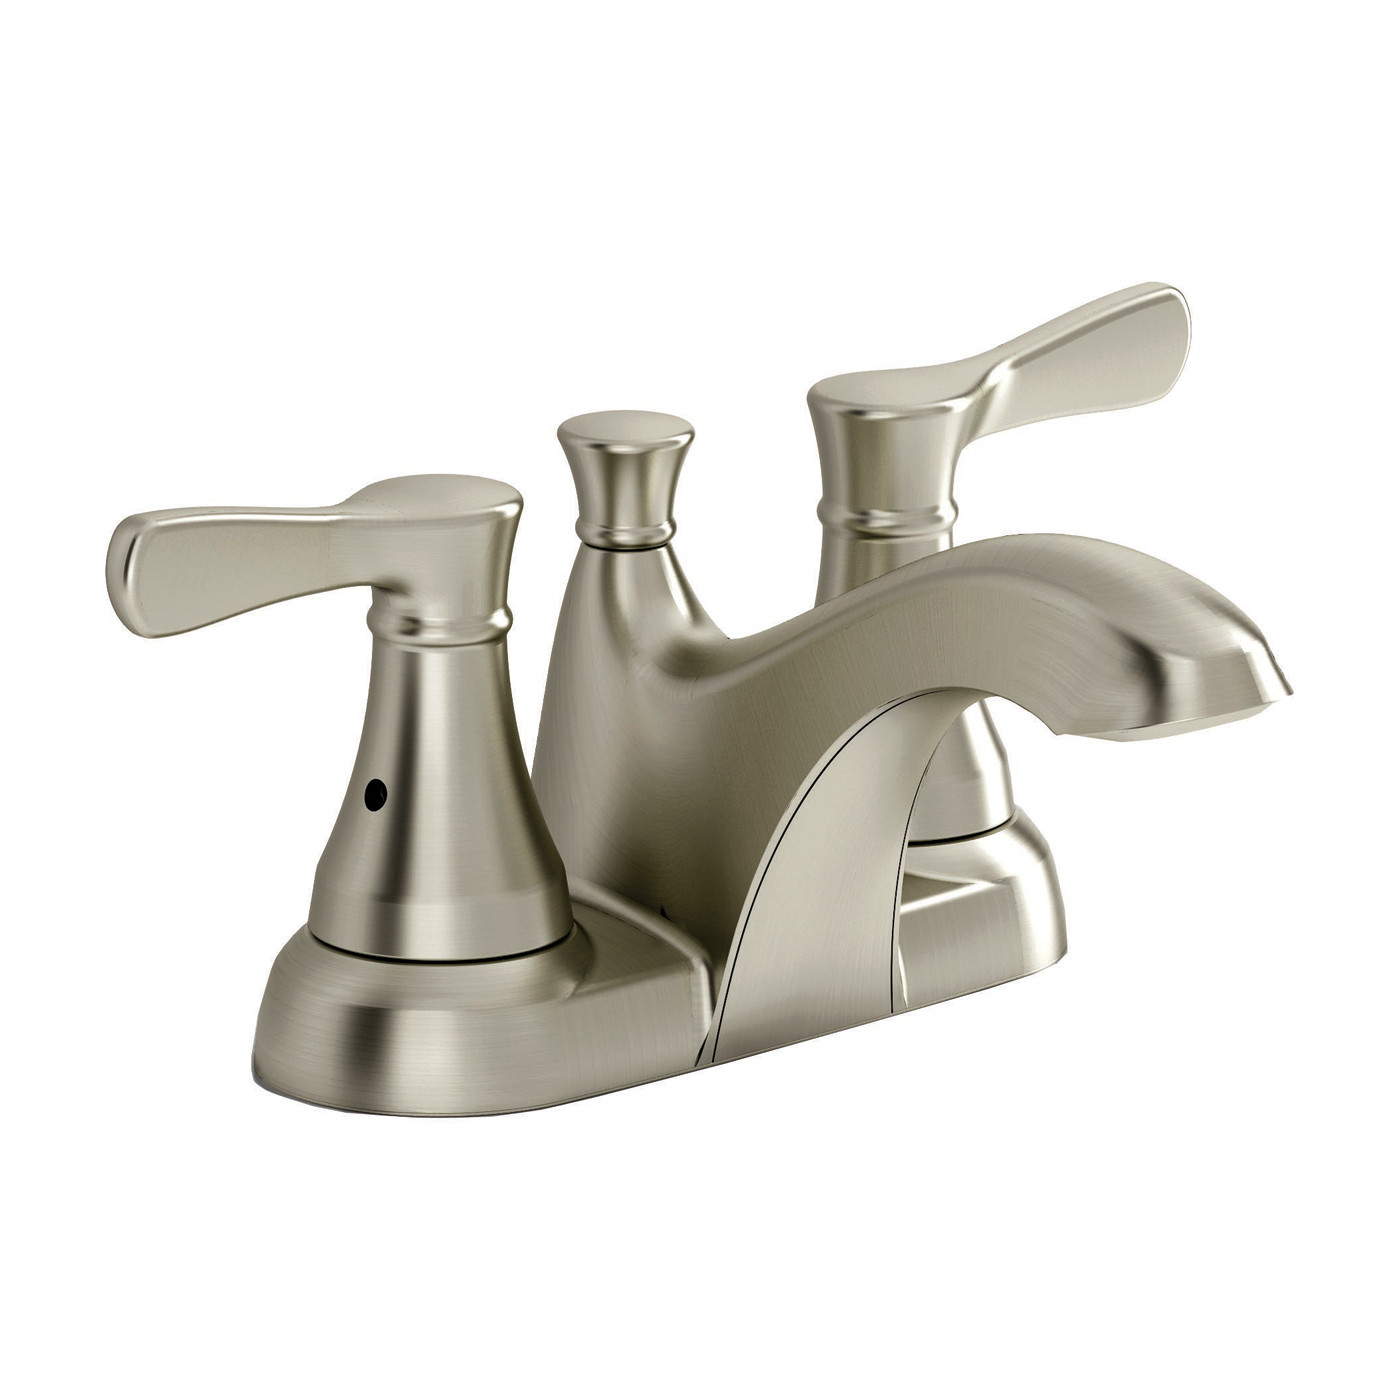 Lowes Bathroom Shower Faucets
 Bathroom Amazing Design Delta Faucets Lowes For Cool